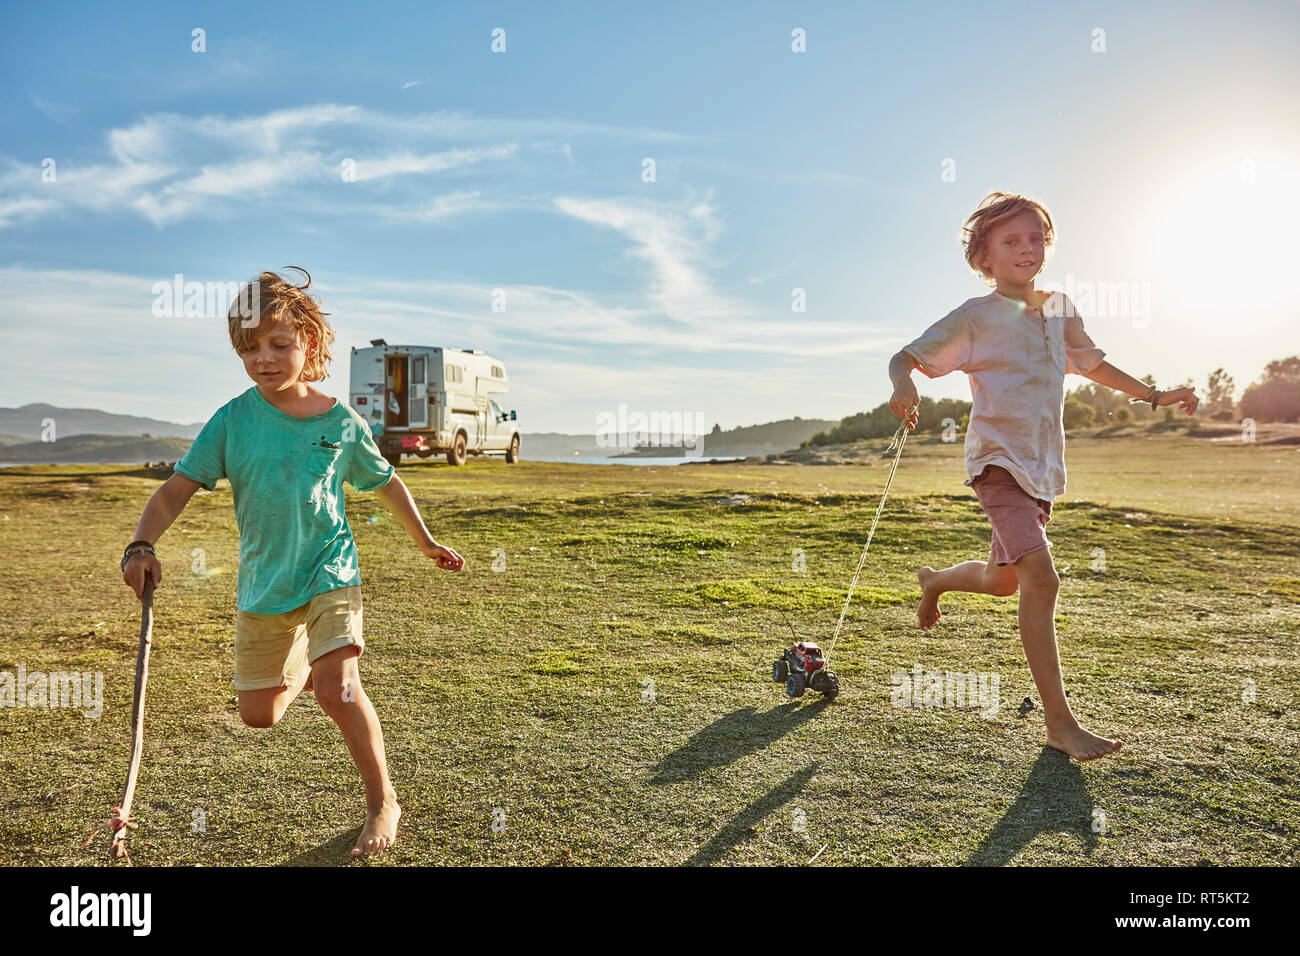 Chile, Talca, Rio Maule, two boys running on meadow with toy cars beside camper Stock Photo